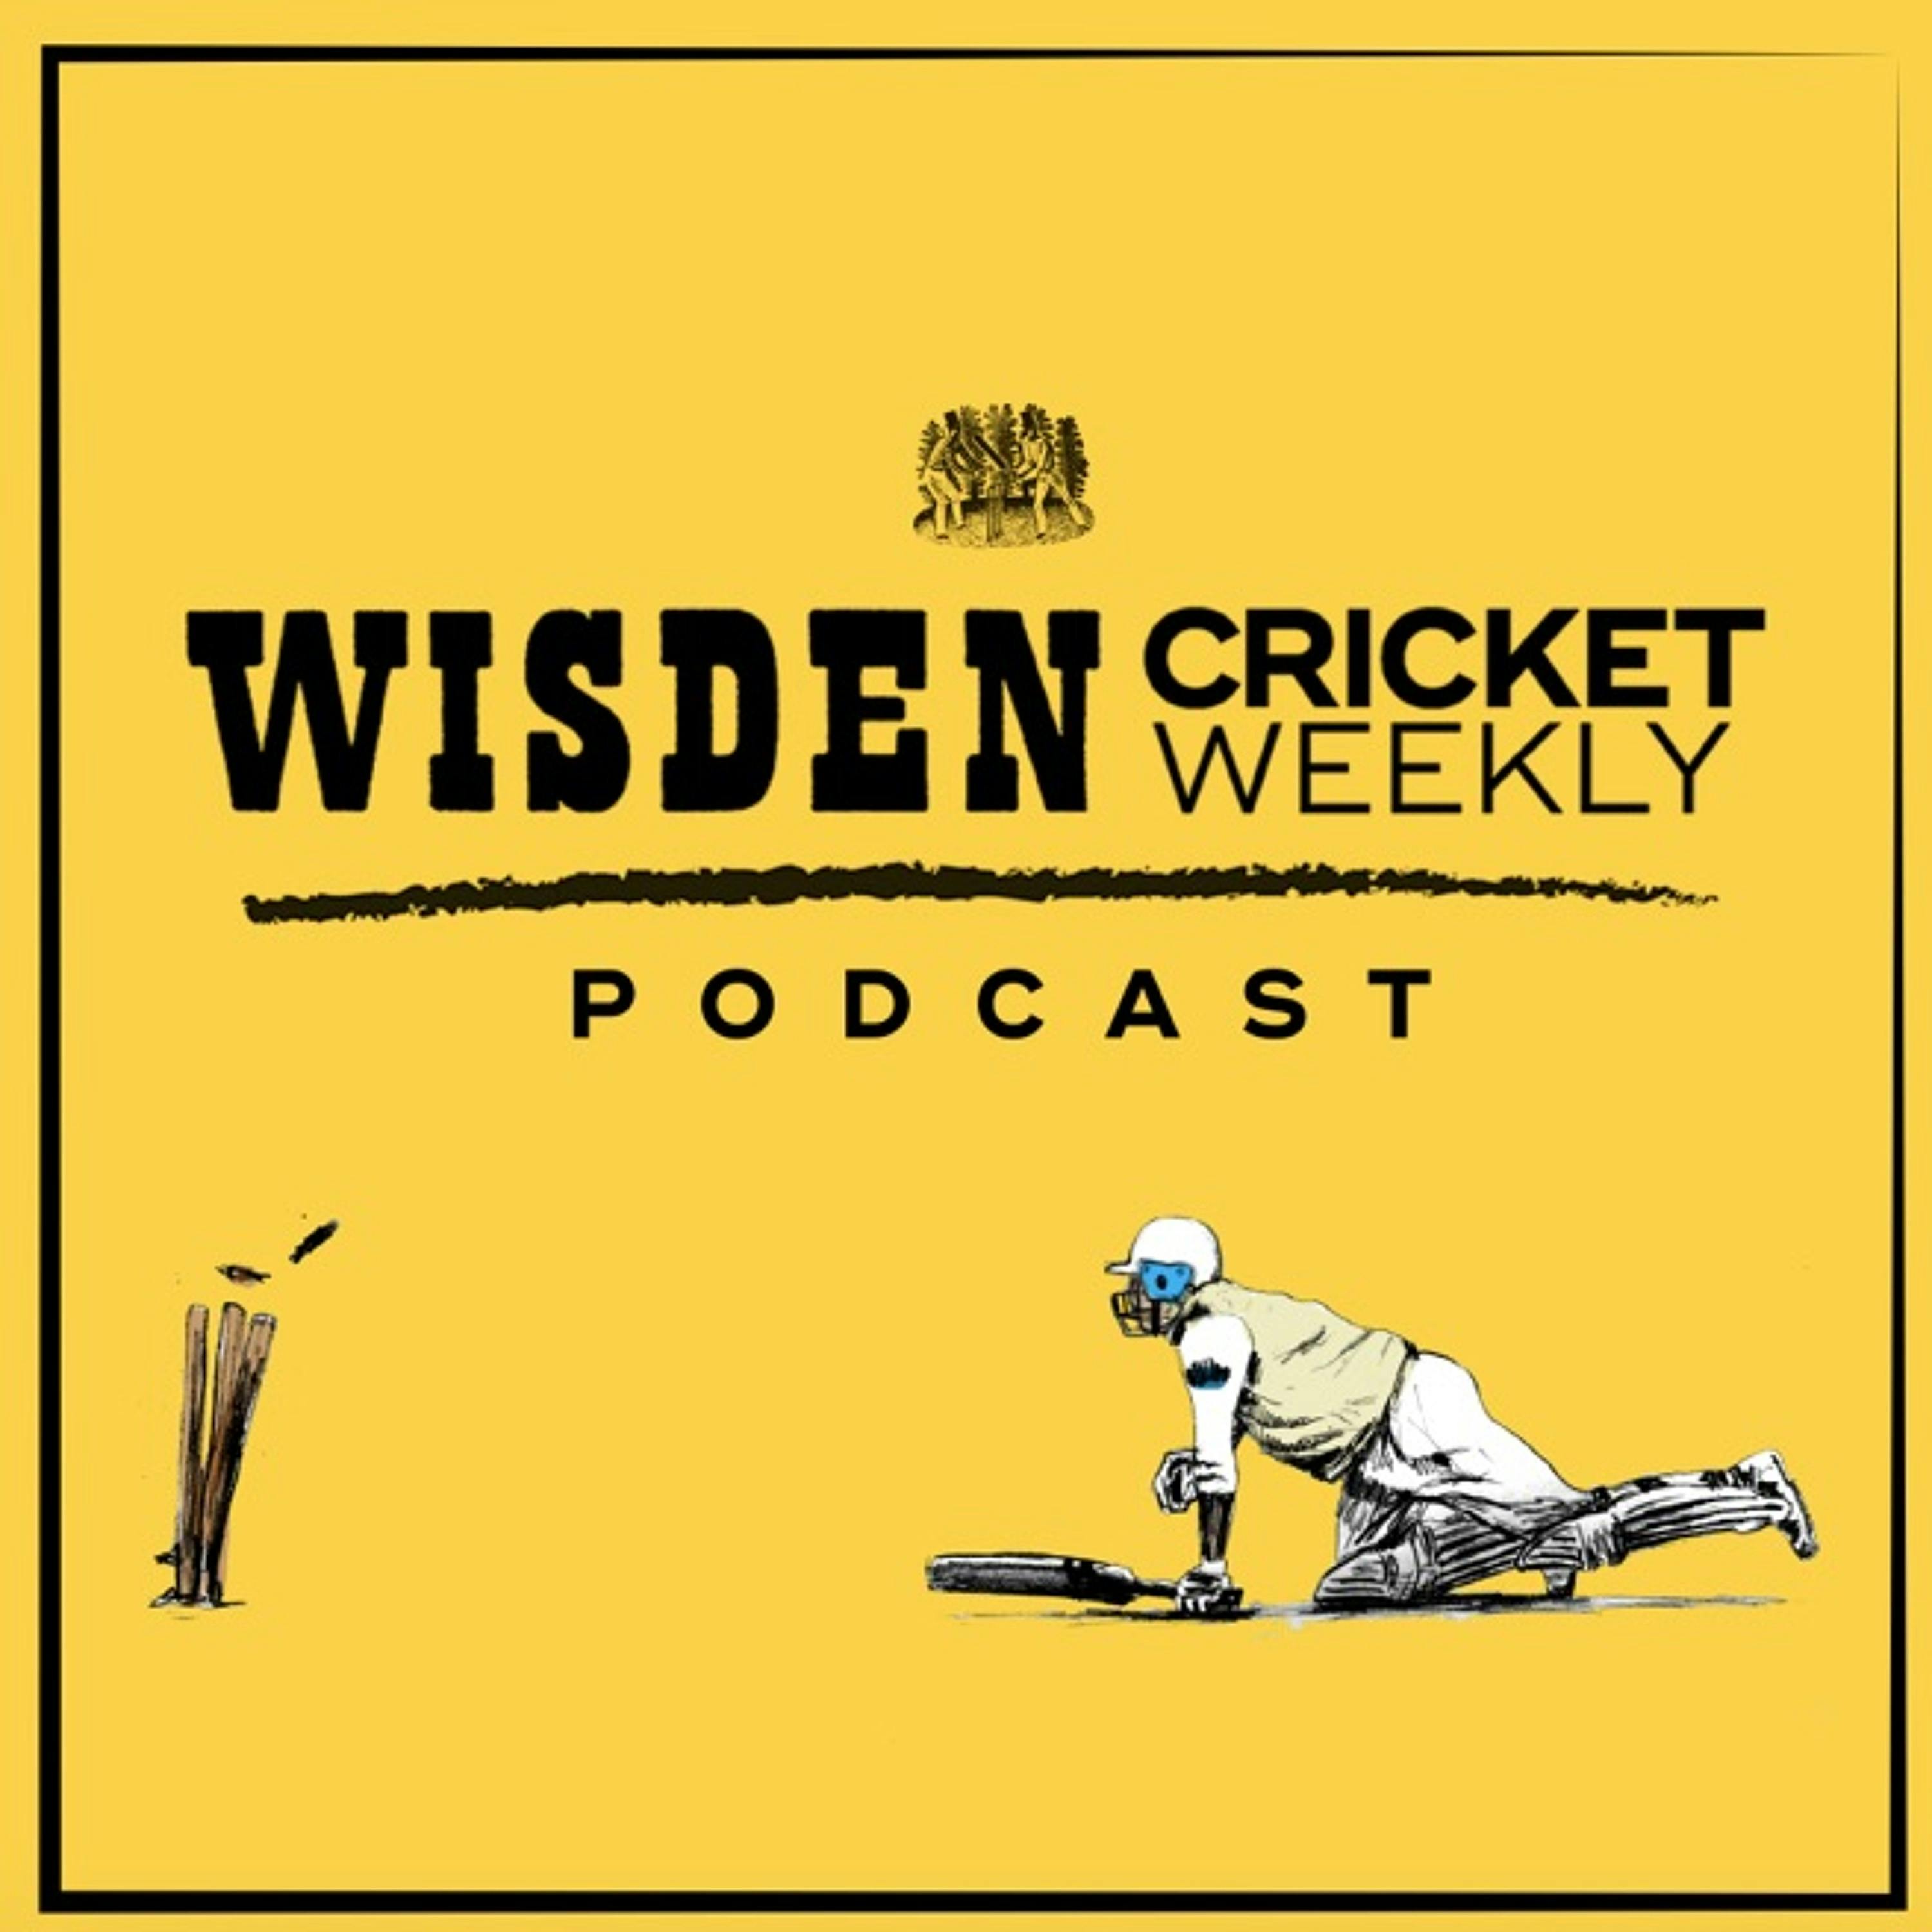 Episode 16: Stuart Law on a winning West Indies team and a bright future for Middlesex